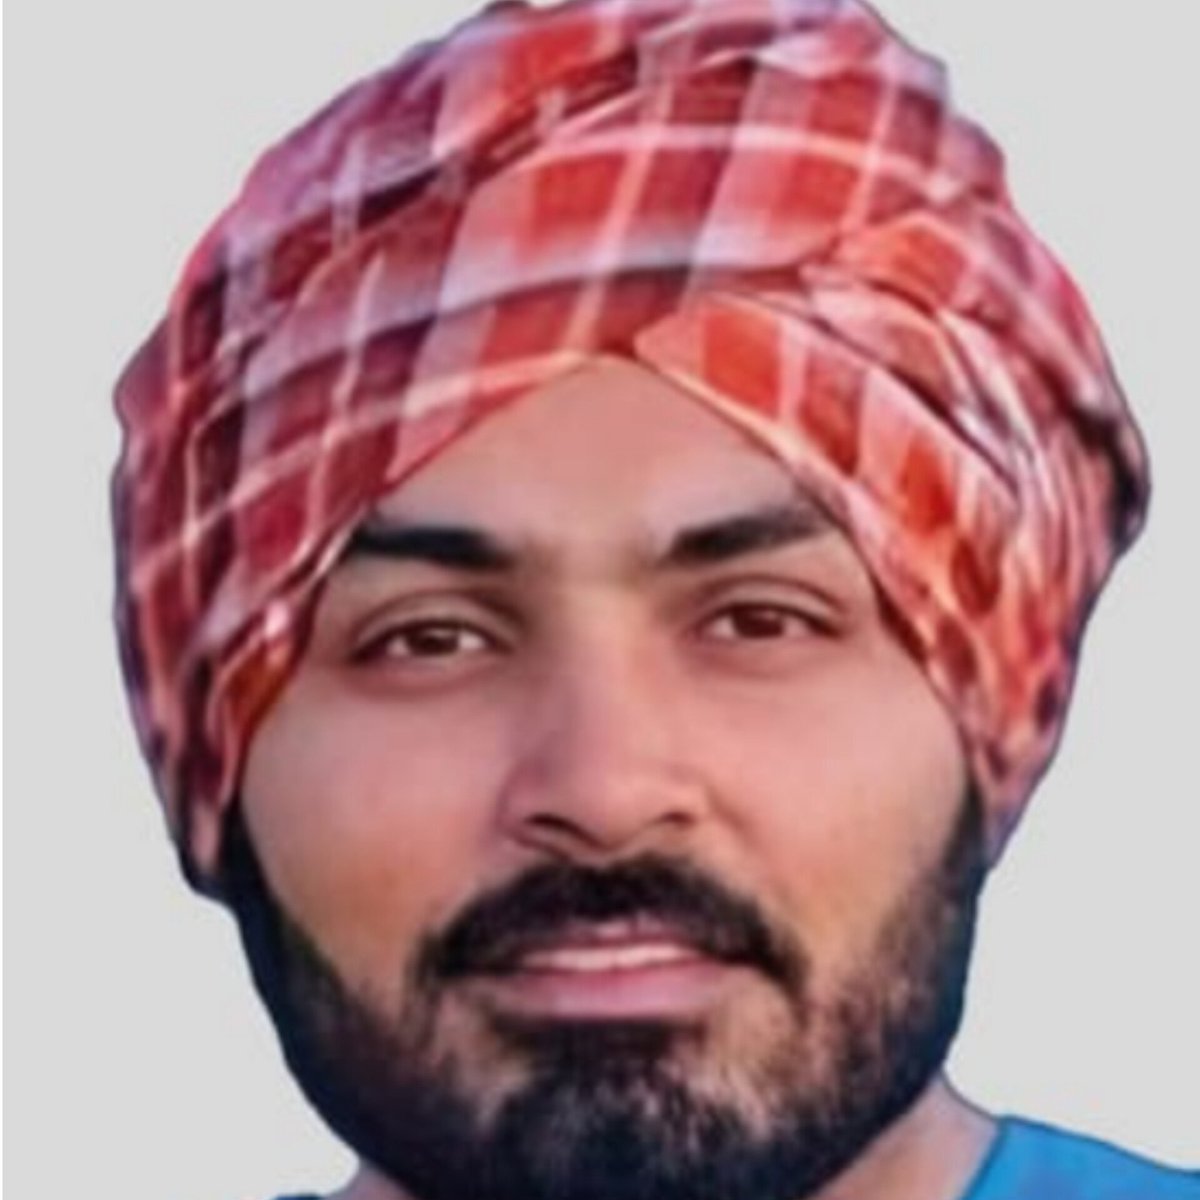 Indian-origin fugitive Dharam Singh Dhaliwal tops Canada's most-wanted list for the murder of 21-year-old Pawanpreet Kaur. 

Read more on shorts91.com/category/india…

 #CanadaCrime #Wanted #JusticeForPawanpreet #IndianOriginFugitive